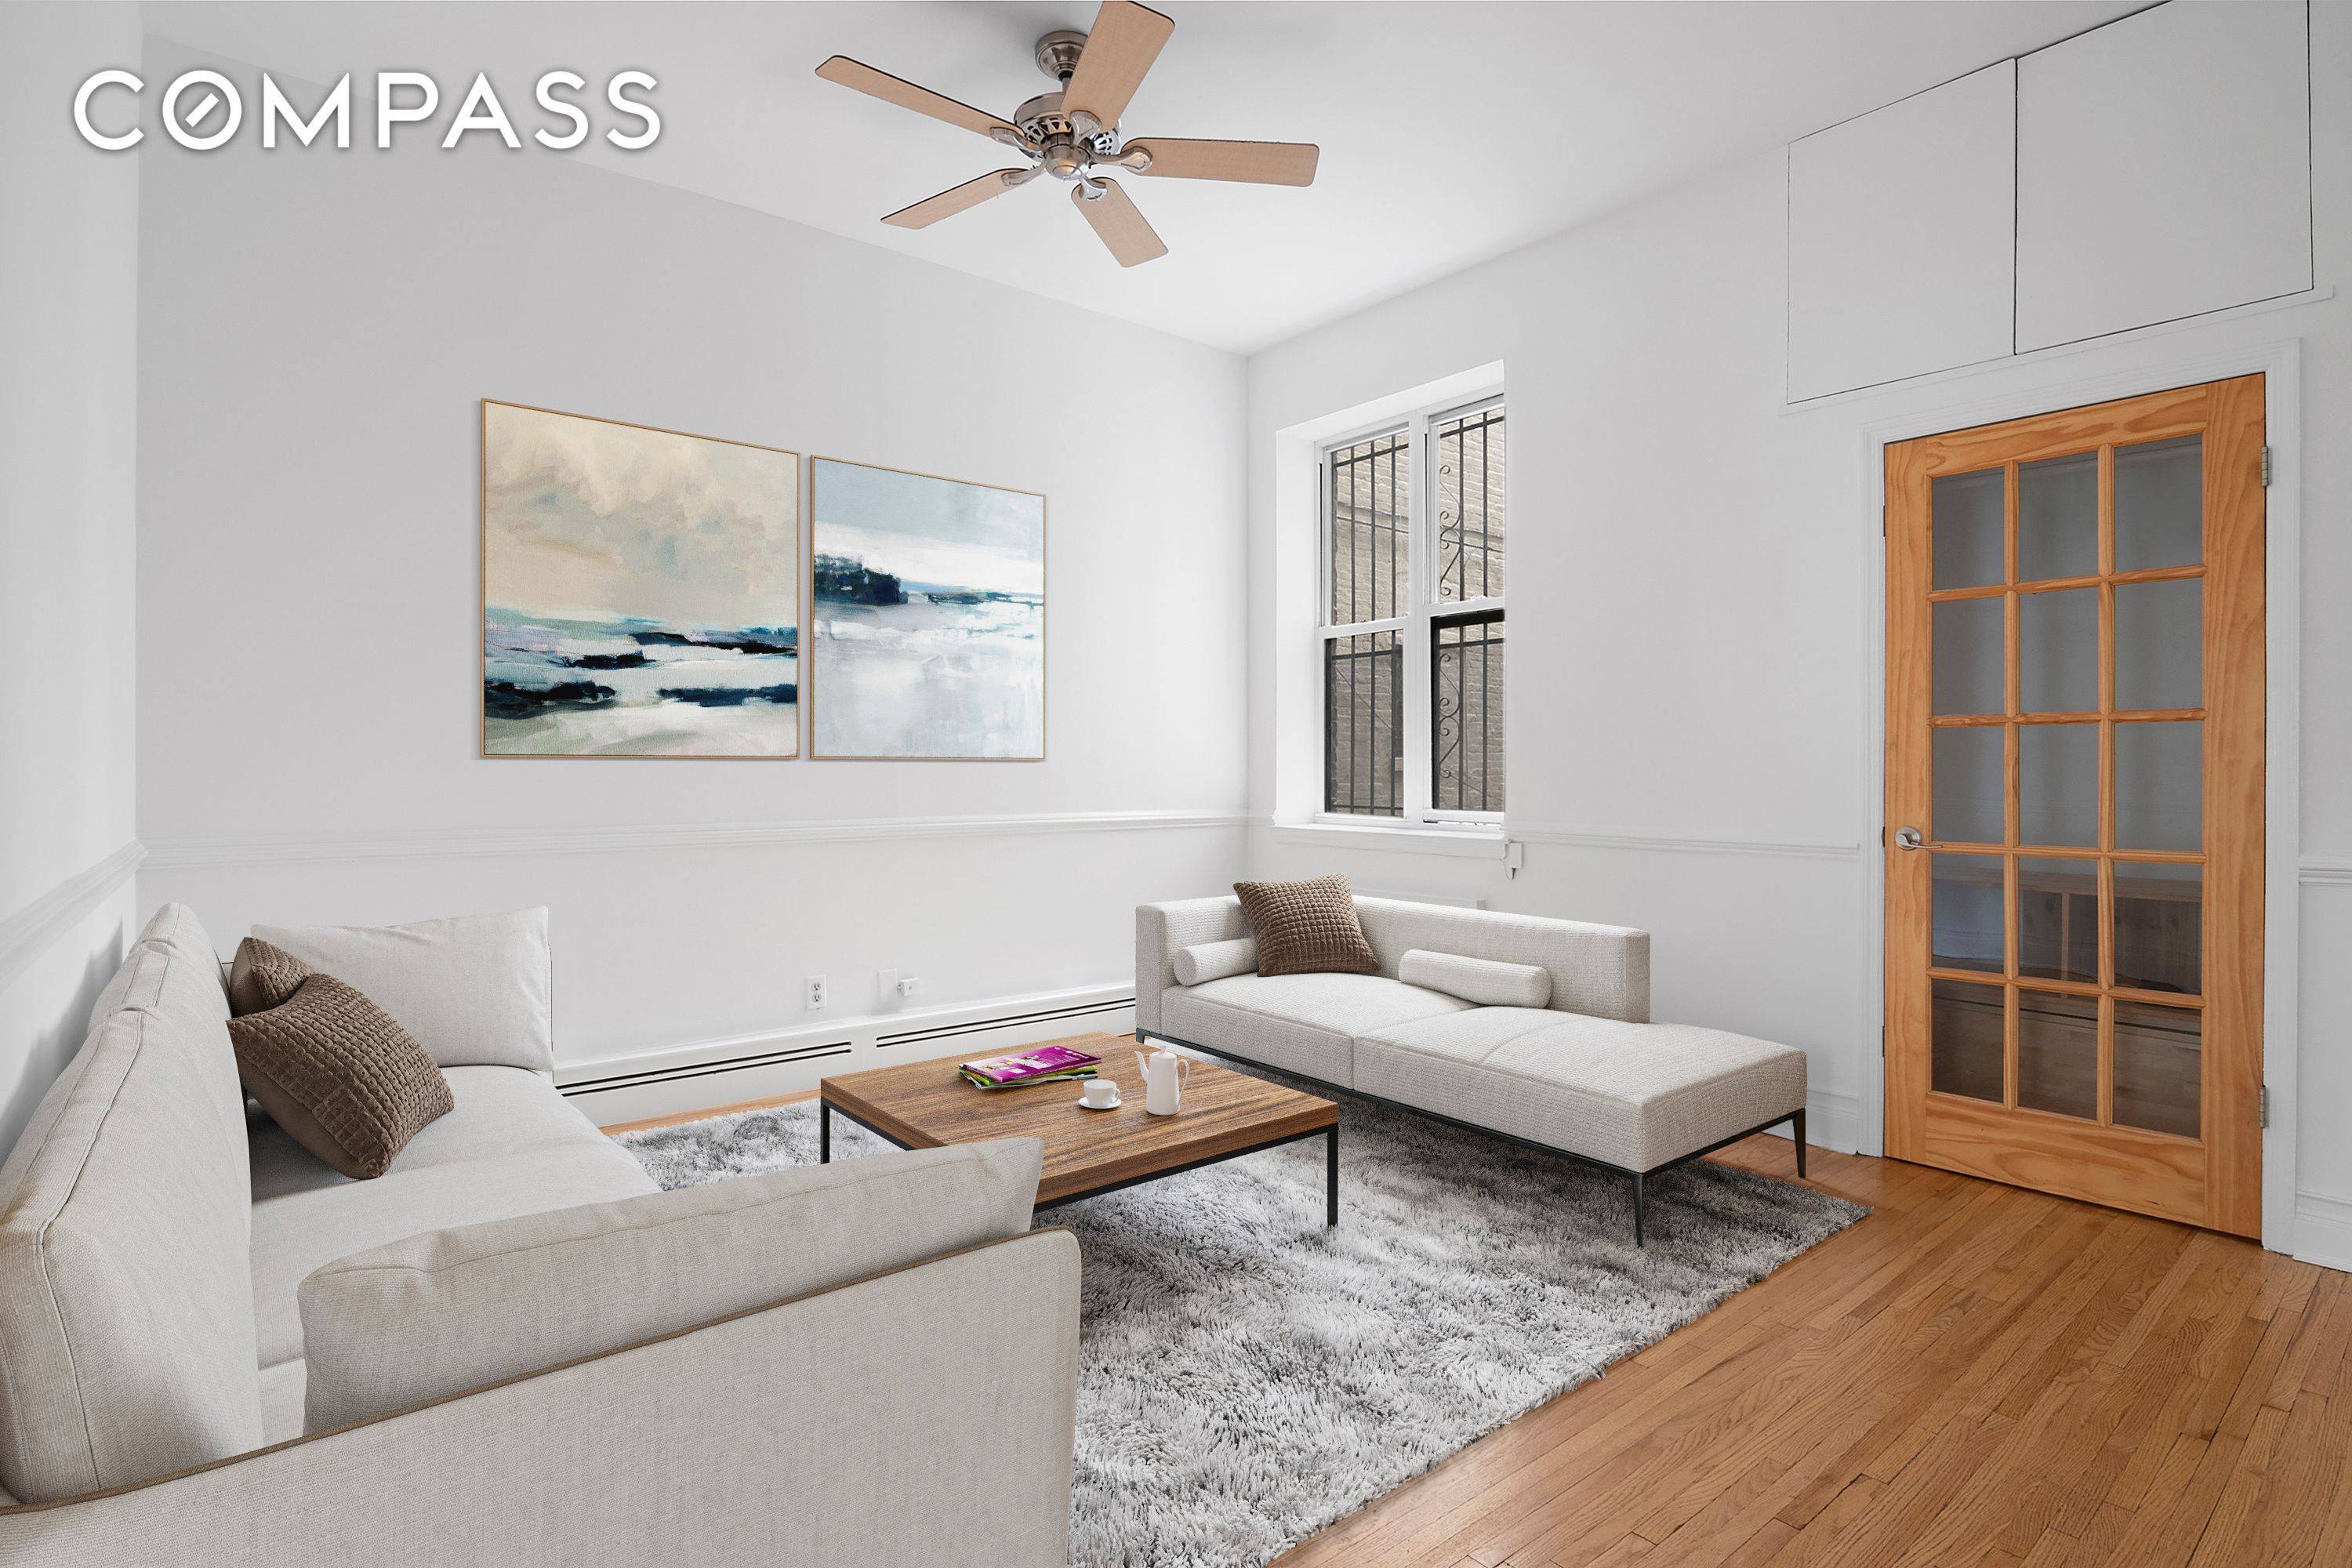 Amazing Location ! ! Just blocks away from Prospect Park, Brooklyn Botanic Gardens, Brooklyn Museum, Grand Army Plaza, central library, restaurants, cafes, green markets, grocers and local shops.